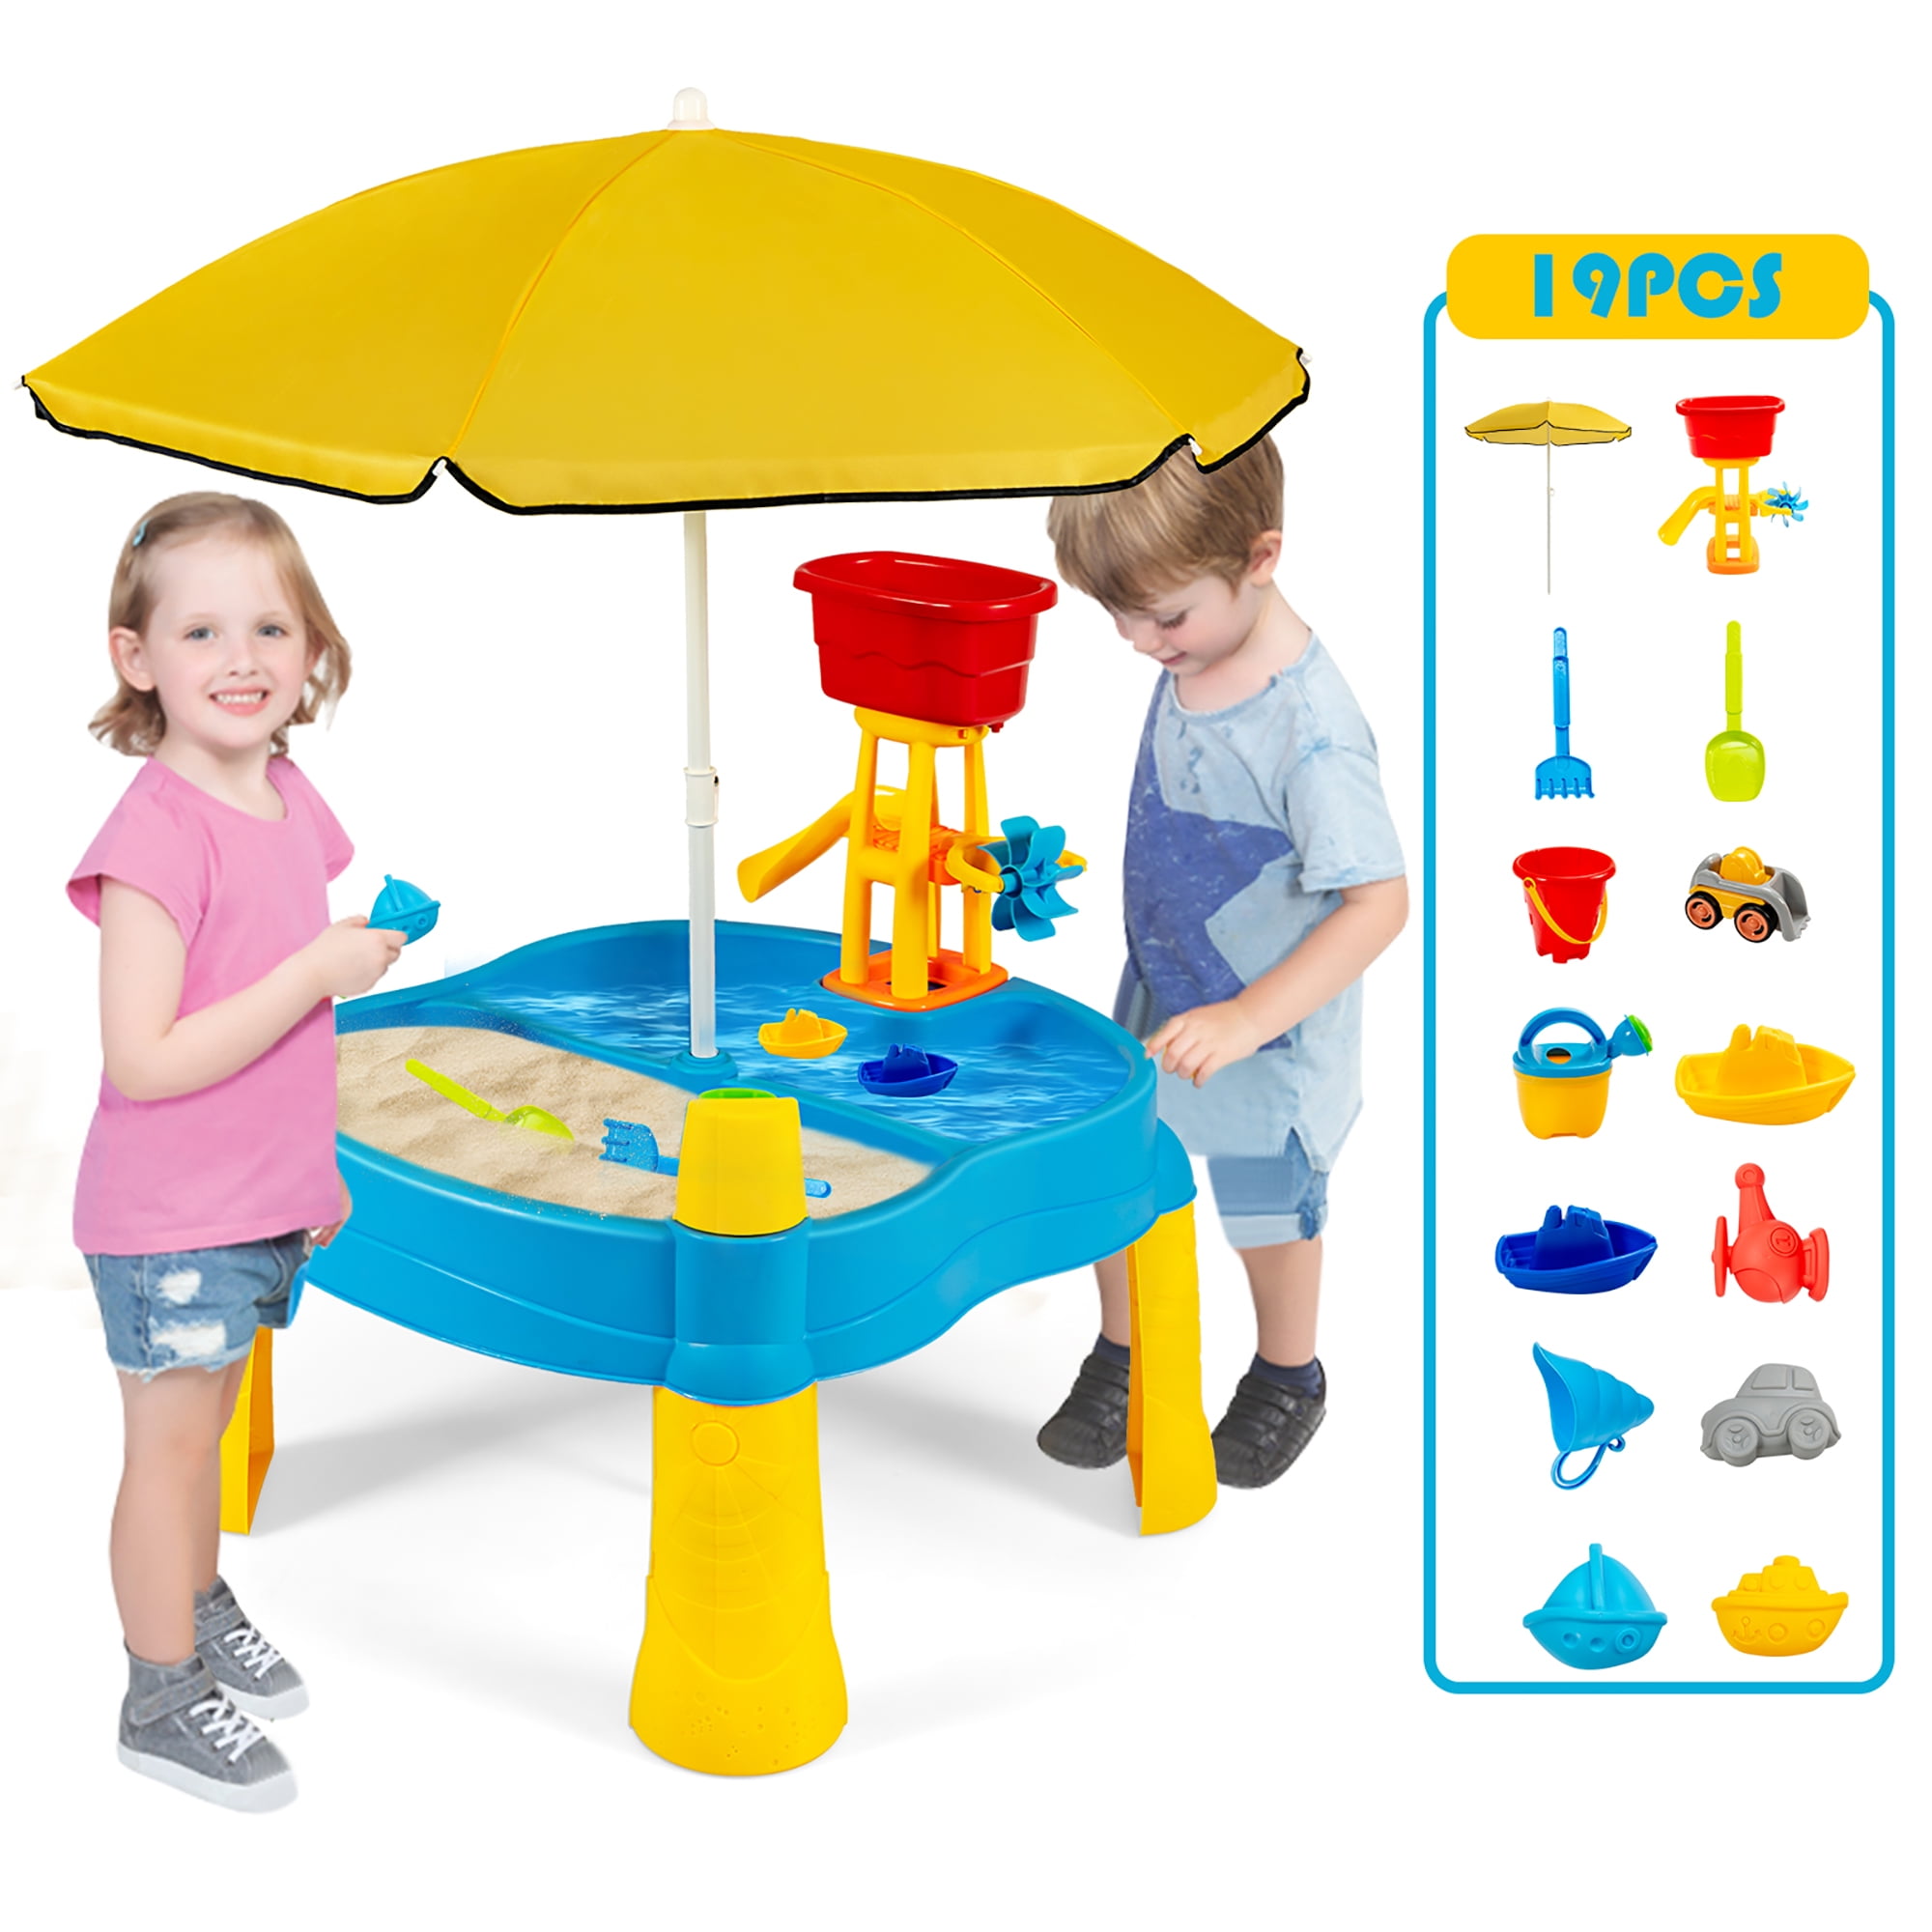 from US, Multicolour 6 Kids Sand and Water Table｜2-in-1 Outdoor Sandbox Activity Table Toys Summer Beach Play Table Center with Accessory Set for Boys and Girls 